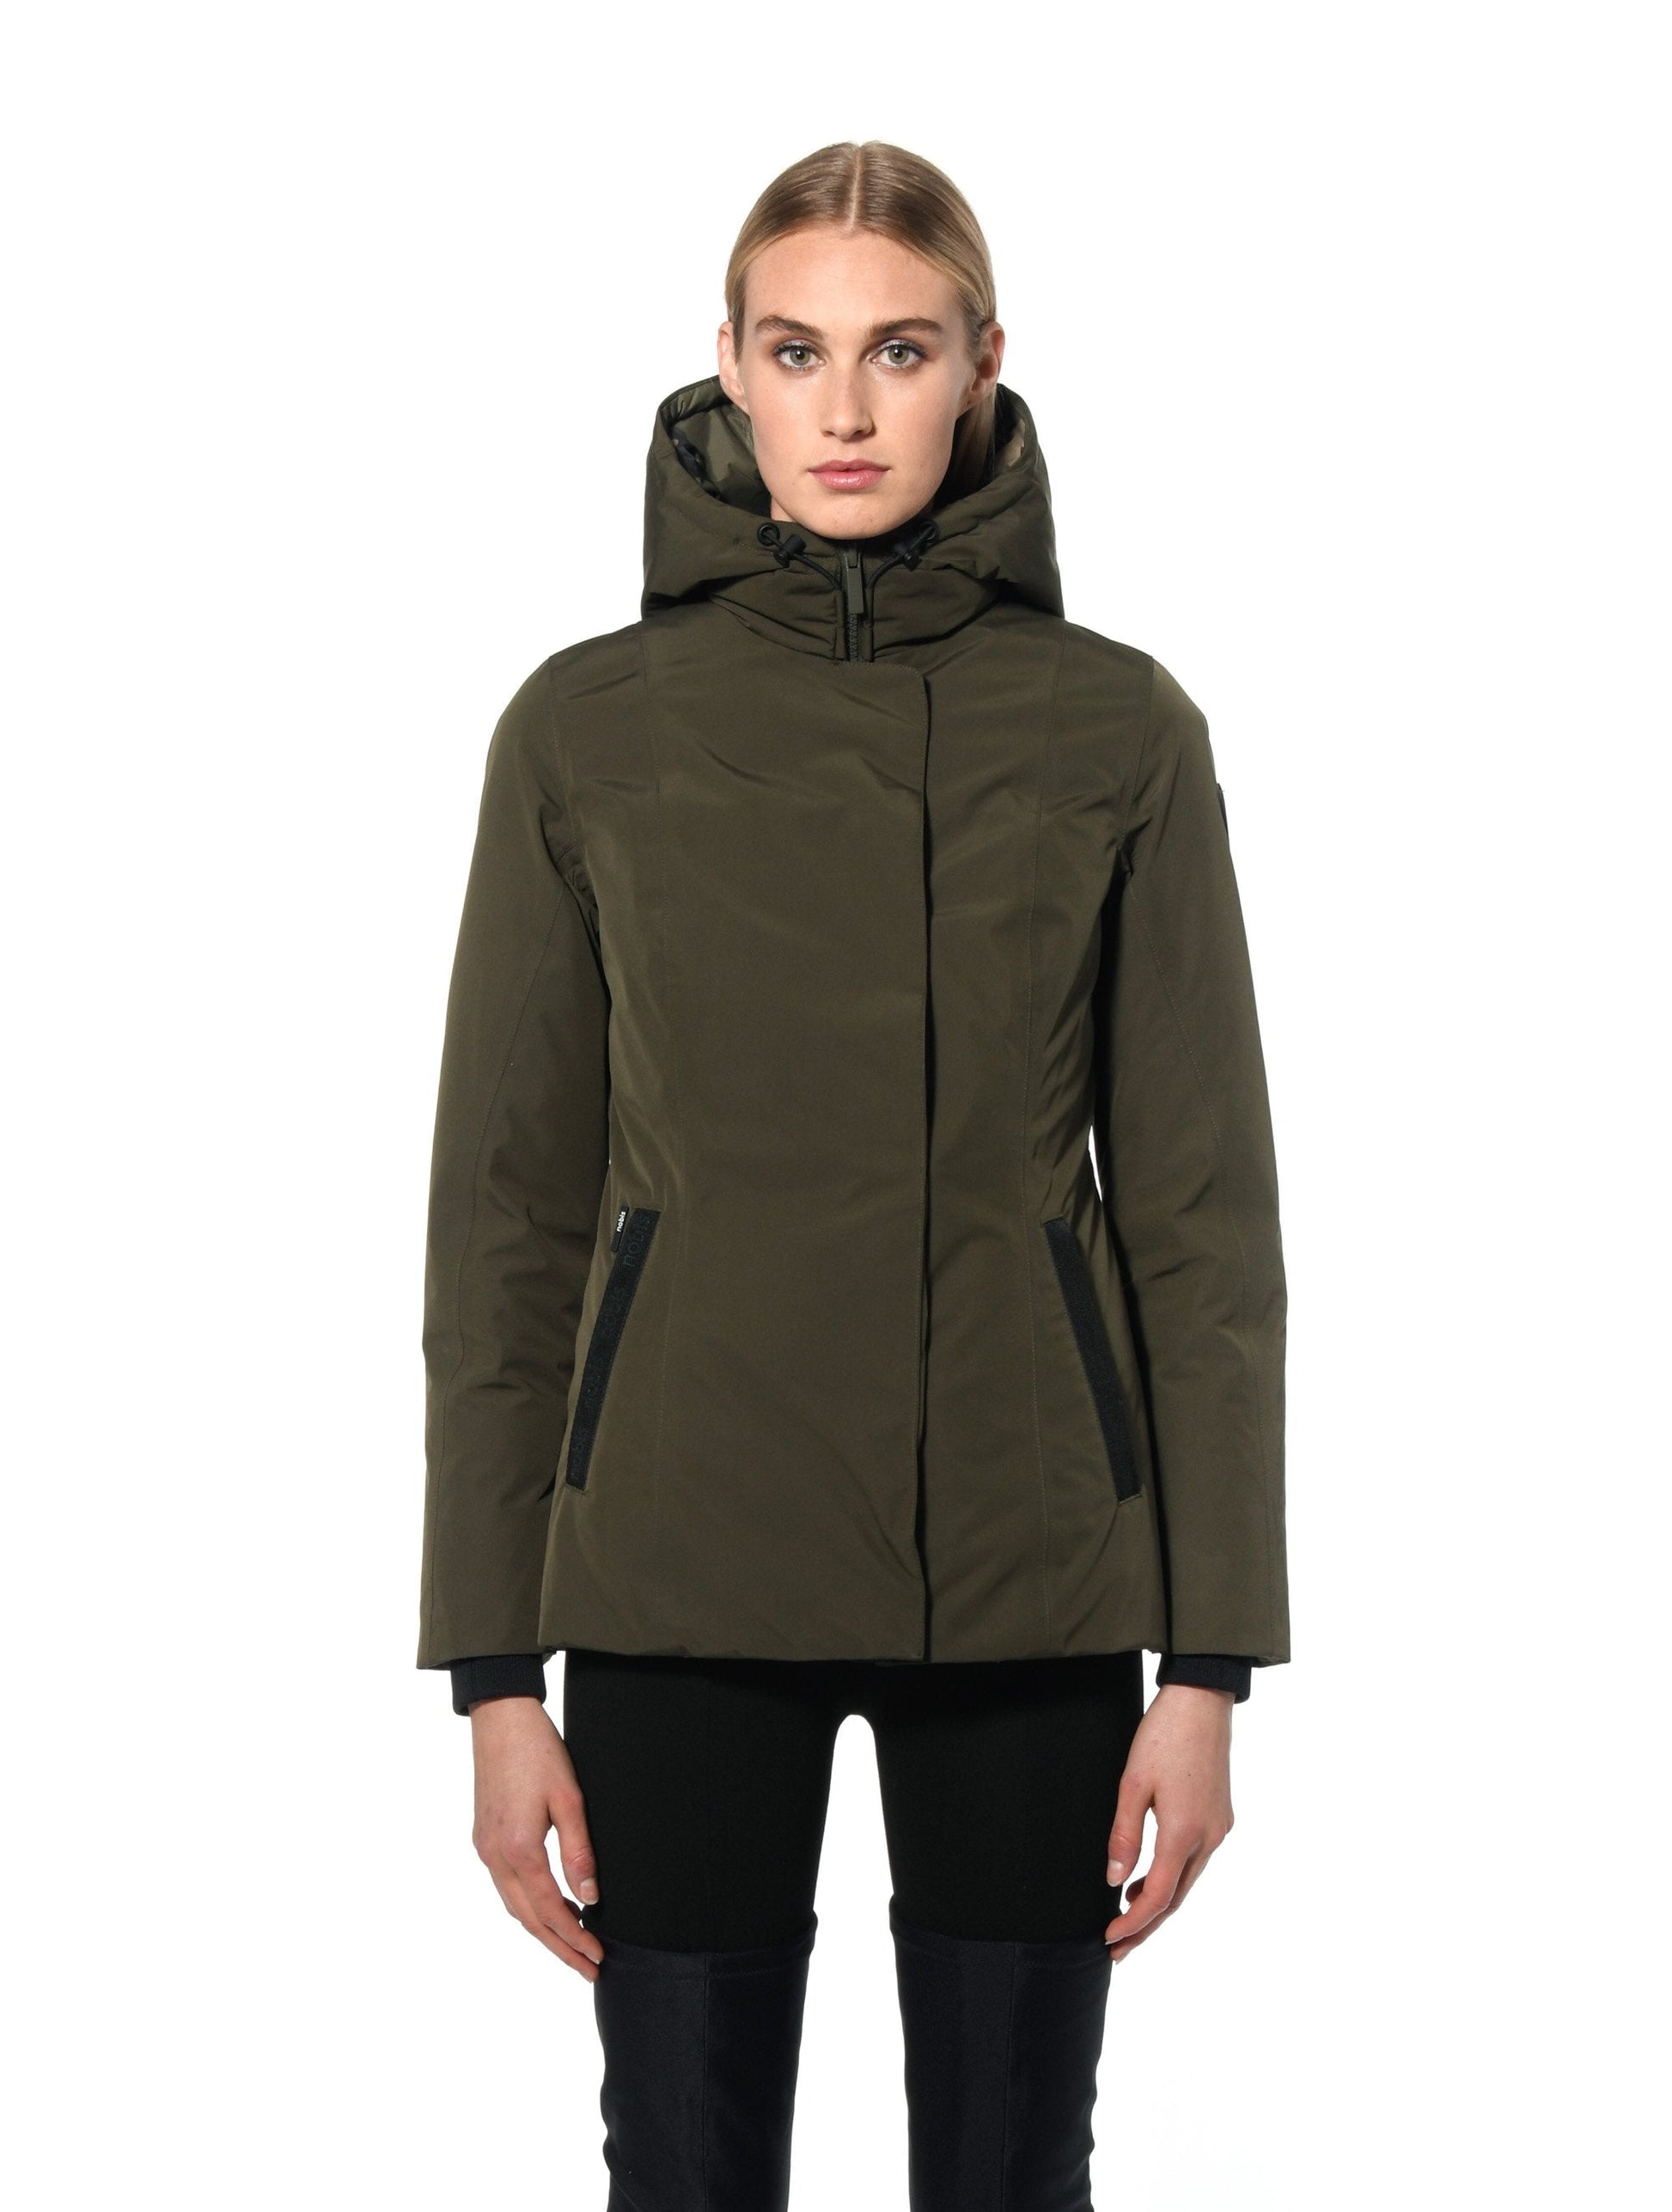 Ladies hip length down-filled parka with non-removable hood and adjustable belt in Fatigue